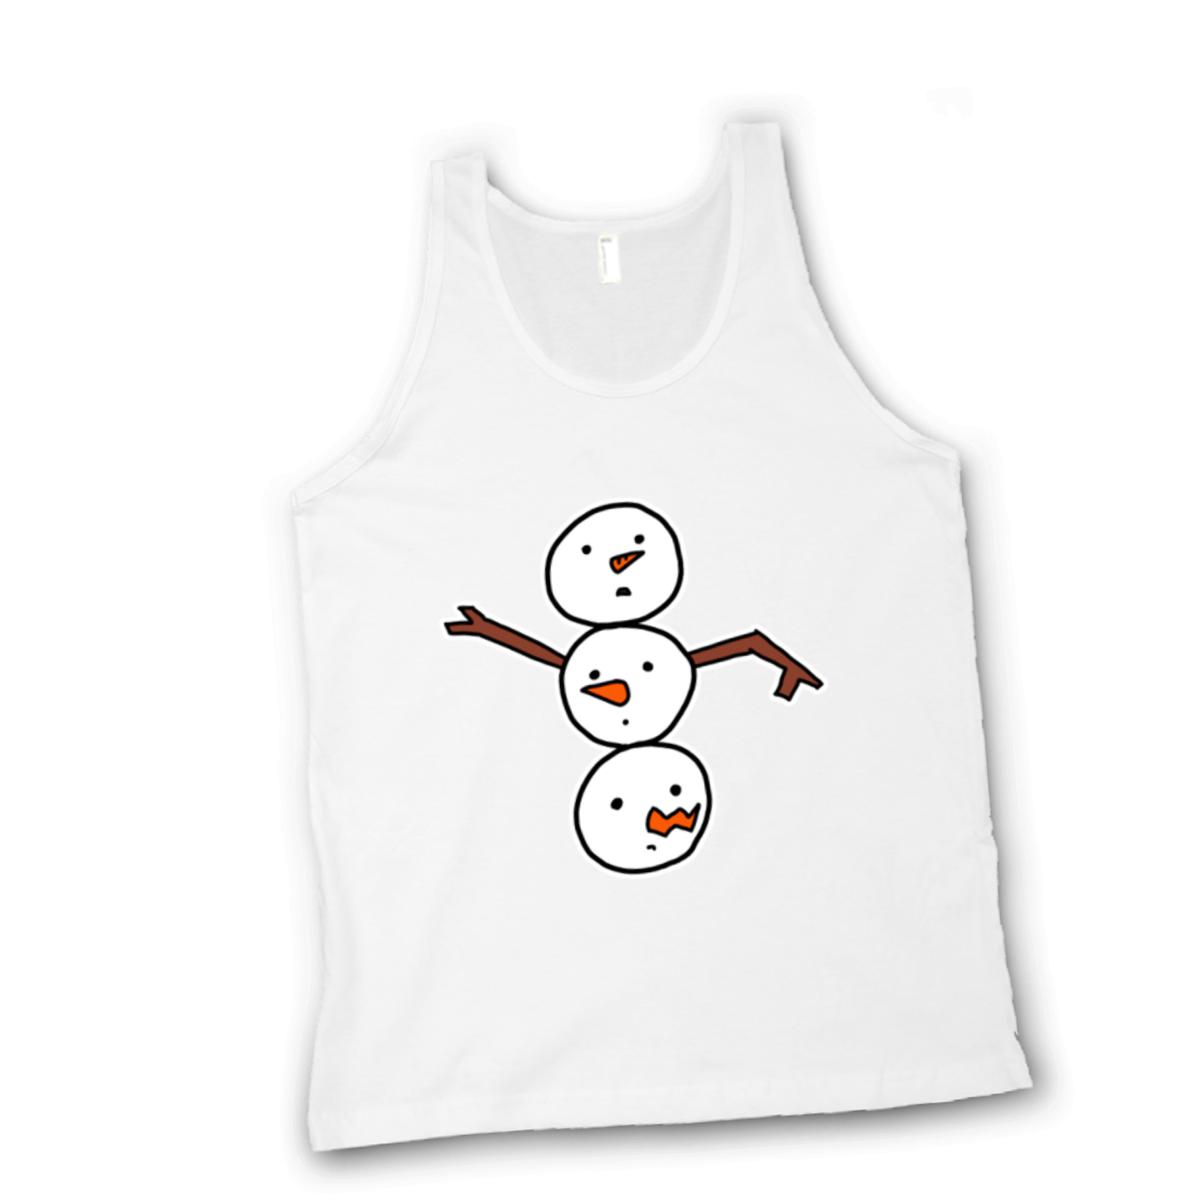 Snowman All Heads Unisex Tank Top Small white